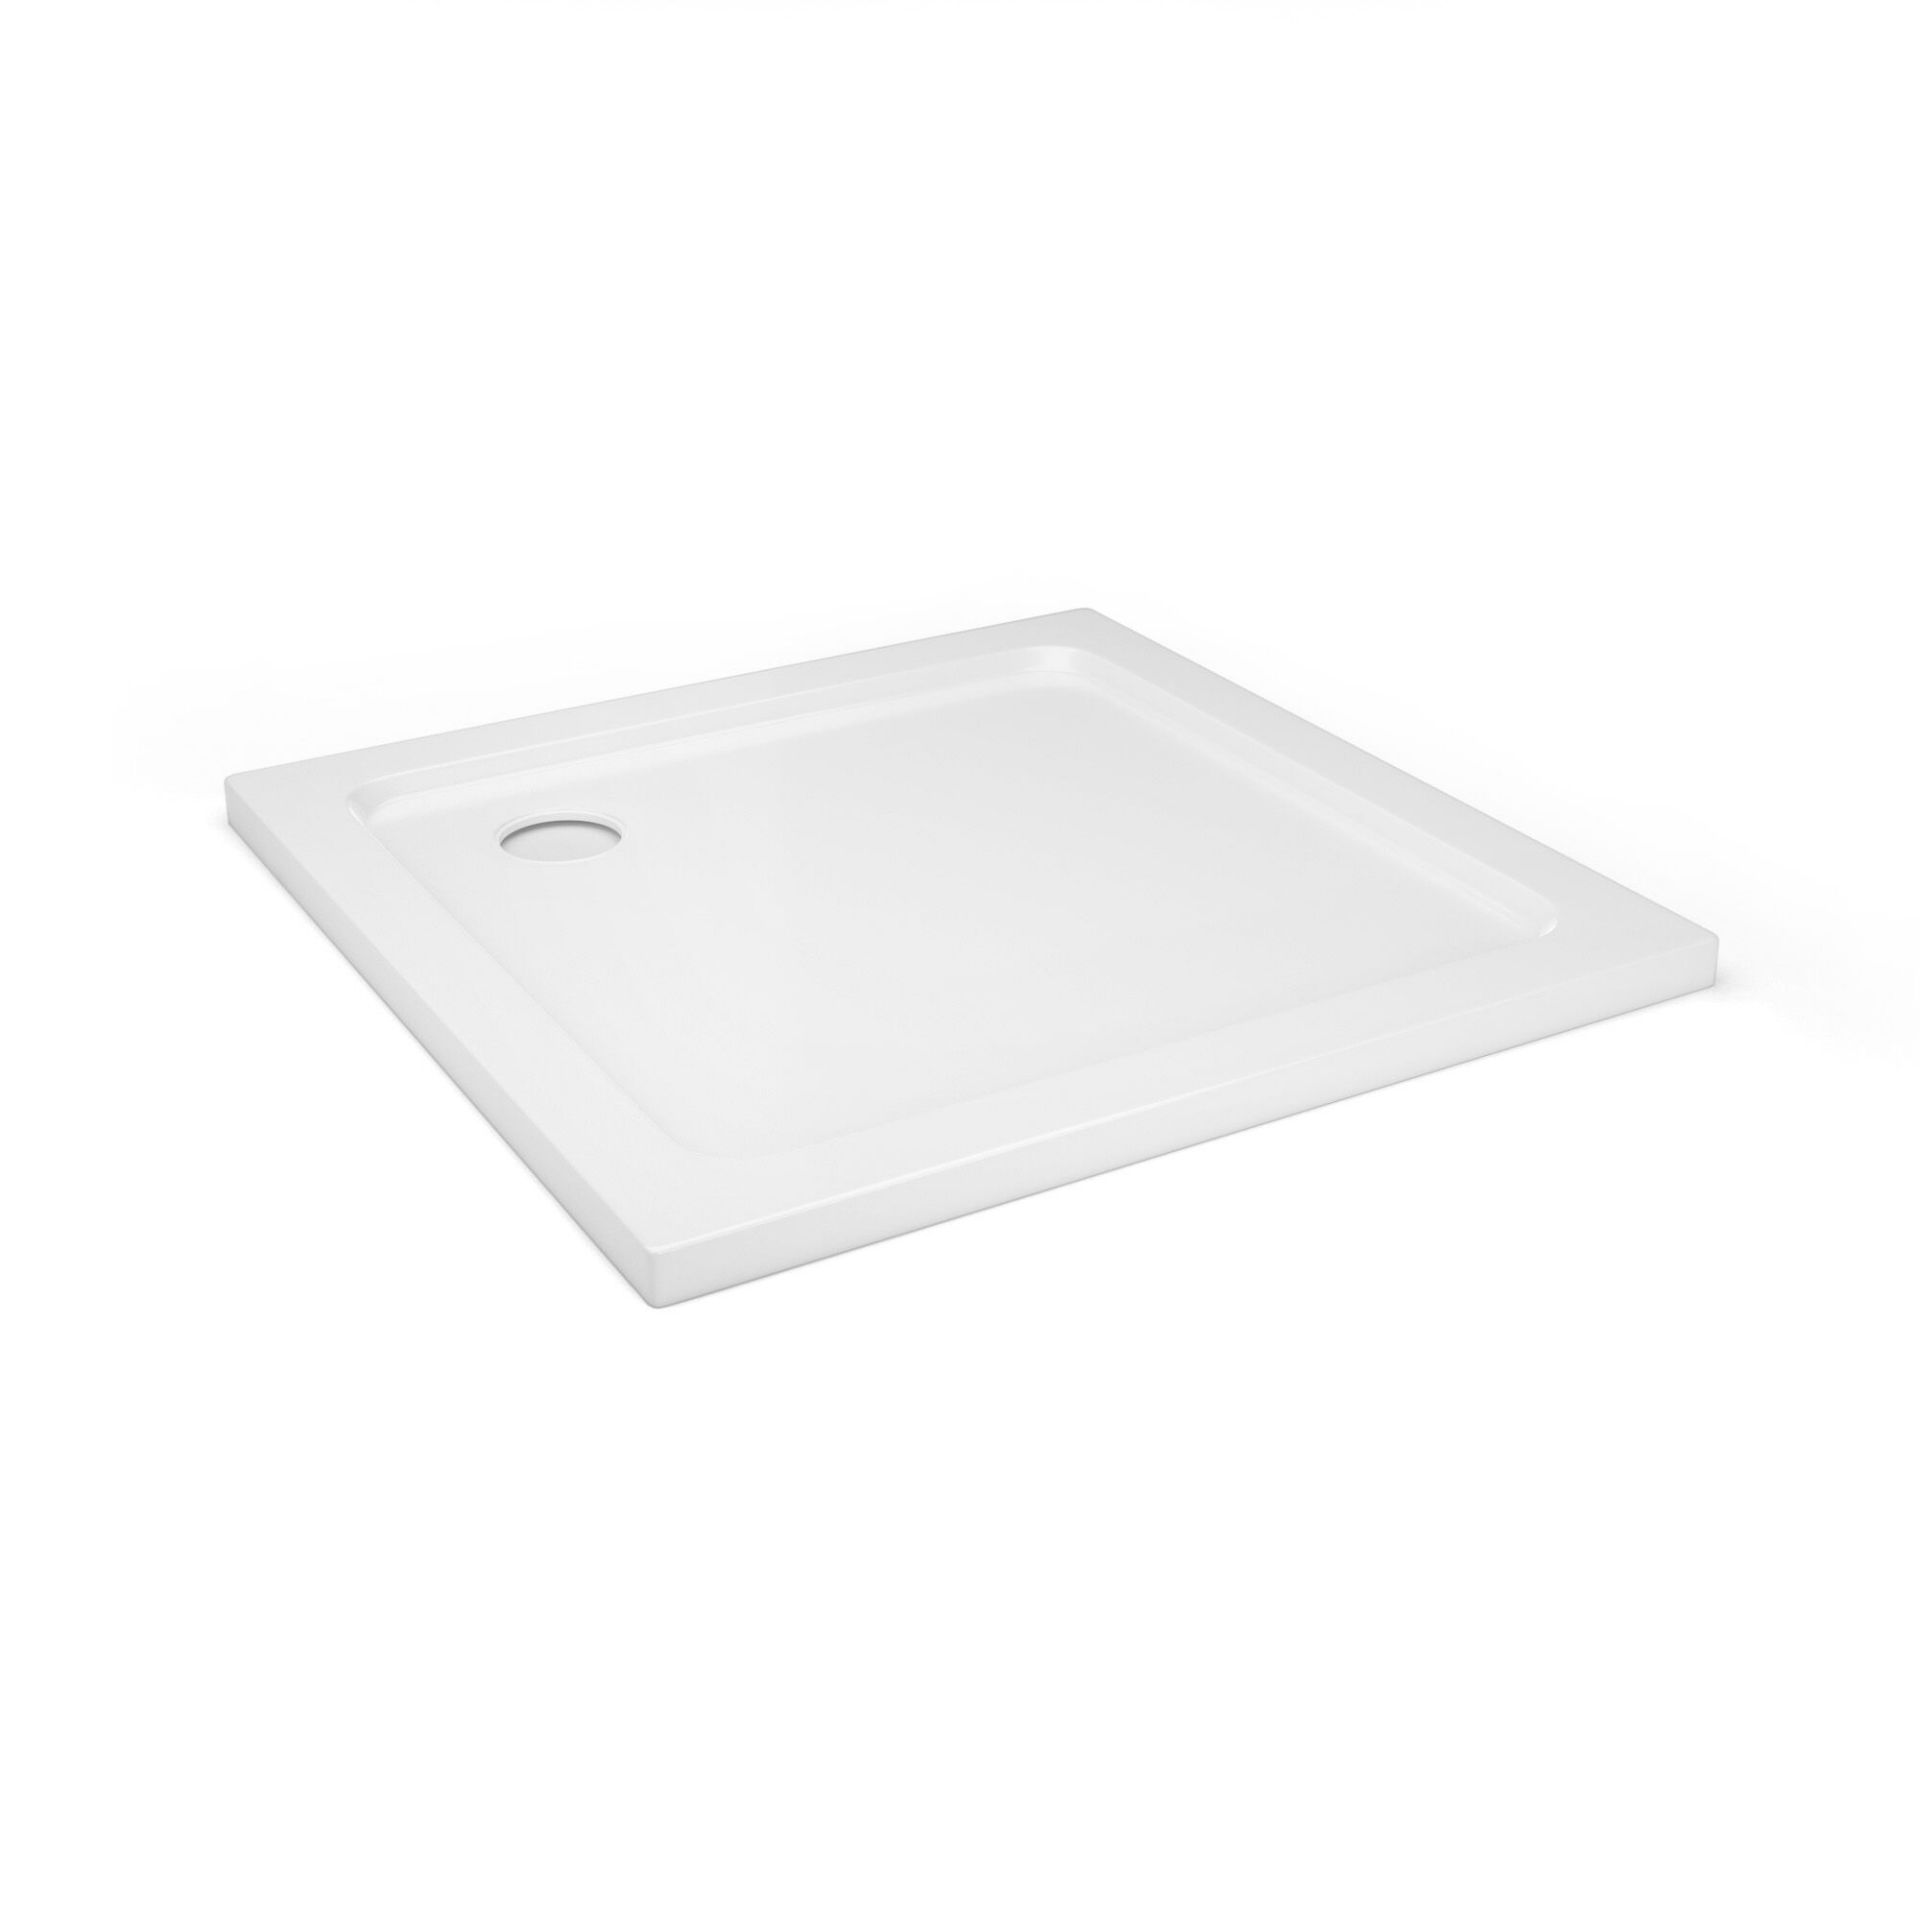 (AD180) 760x760mm Square Ultra Slim Stone Shower Tray. RRP £283.99. Low profile ultra slim design - Image 2 of 2